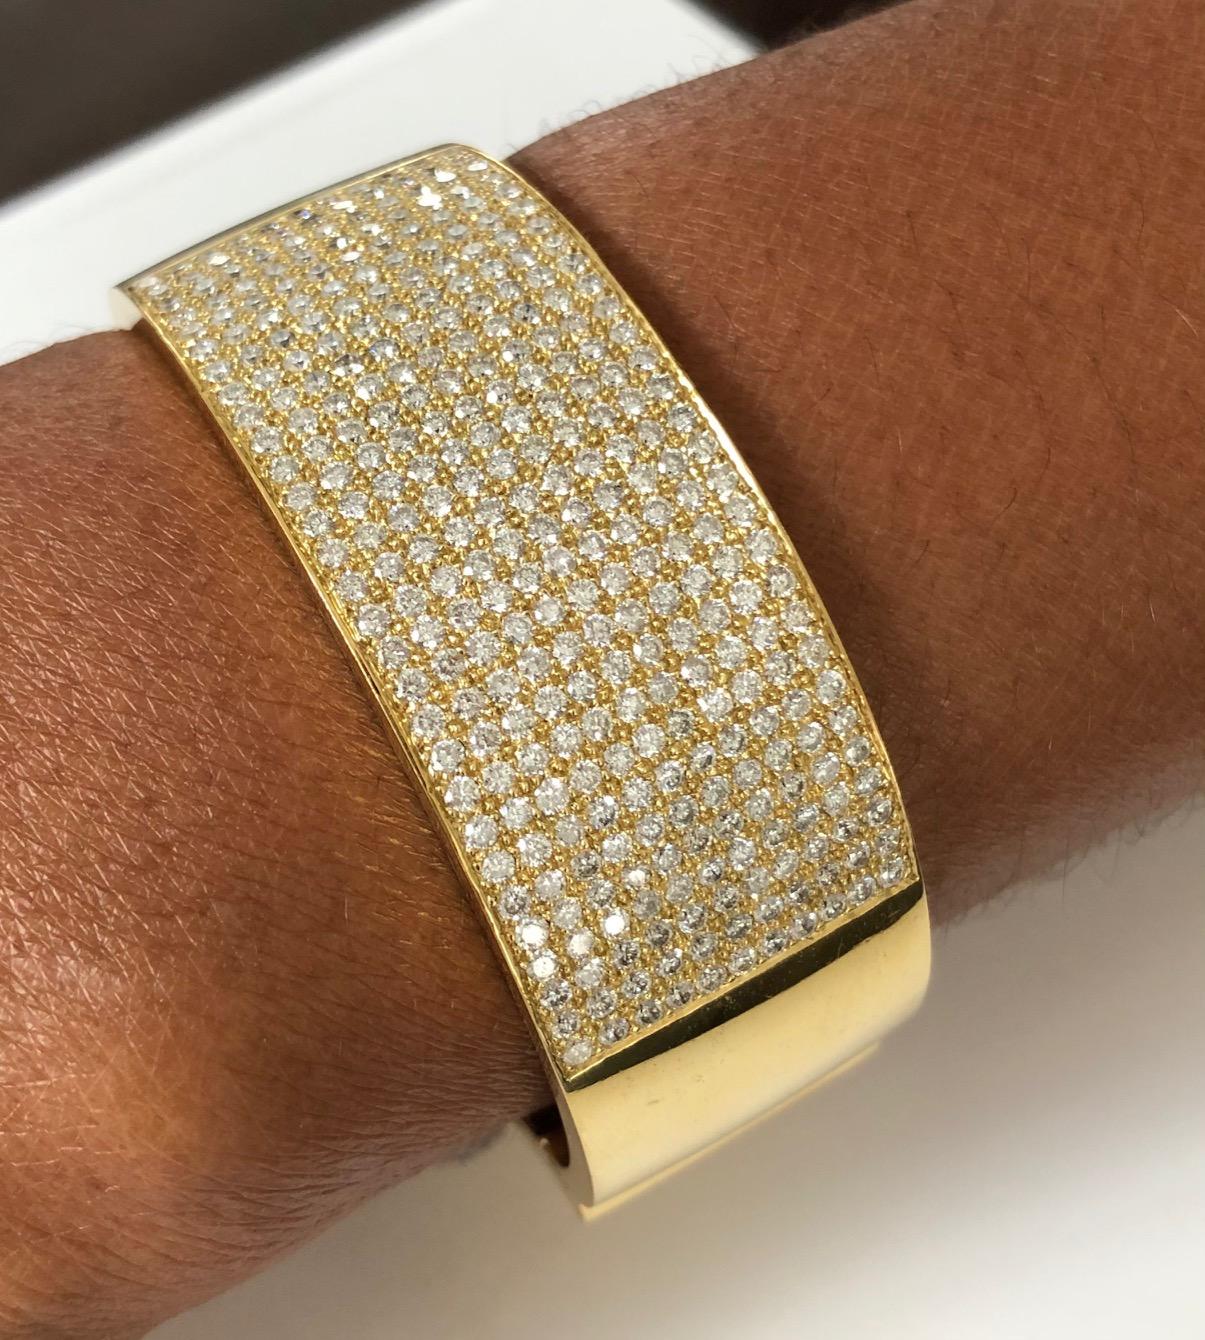 Beautiful and stylish Bangle bracelet, made in 18K Yellow Gold and set with 319 round Diamonds 6.50 carats, this bracelet features our own push-button opener for easy use.
Bracelet Width: 7/8 inch ( 2.3 CM )

We design and manufacture our jewelry in